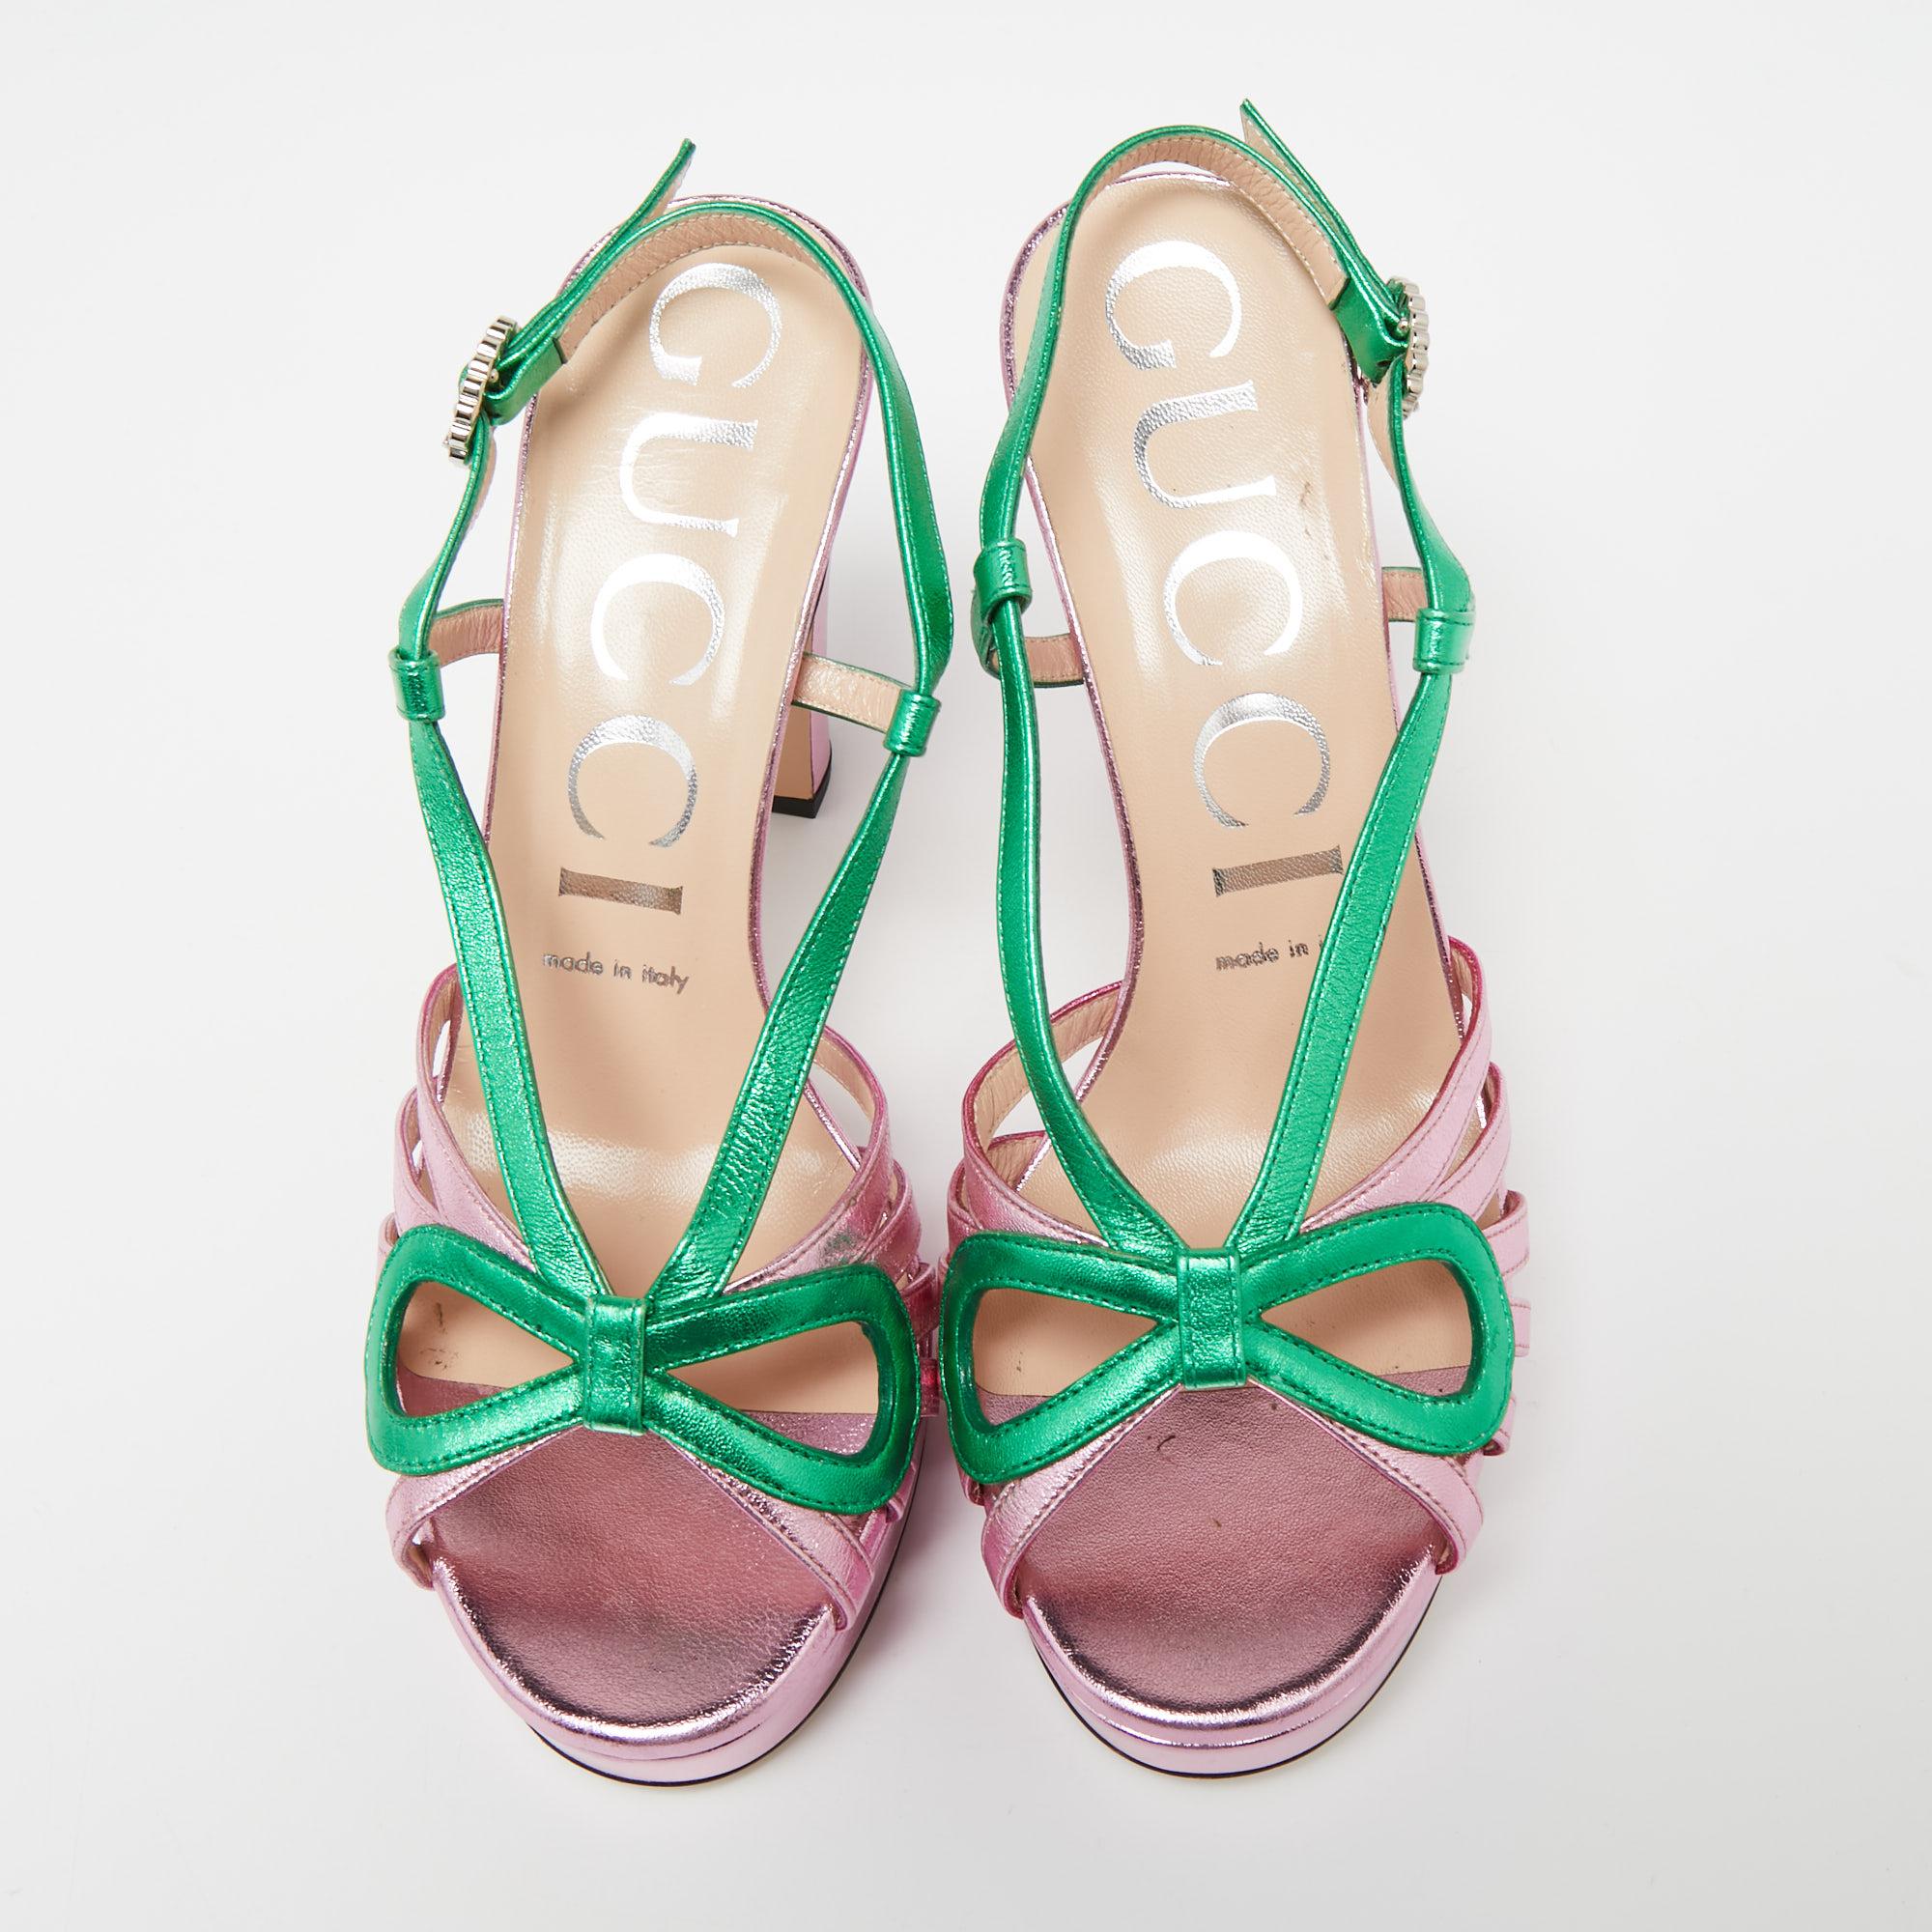 A feminine flair and a sophisticated appeal characterize these stunning Gucci sandals. Crafted using leather in dual shades, they will add an opulent charm to your look and complement many looks that you would want to create.

